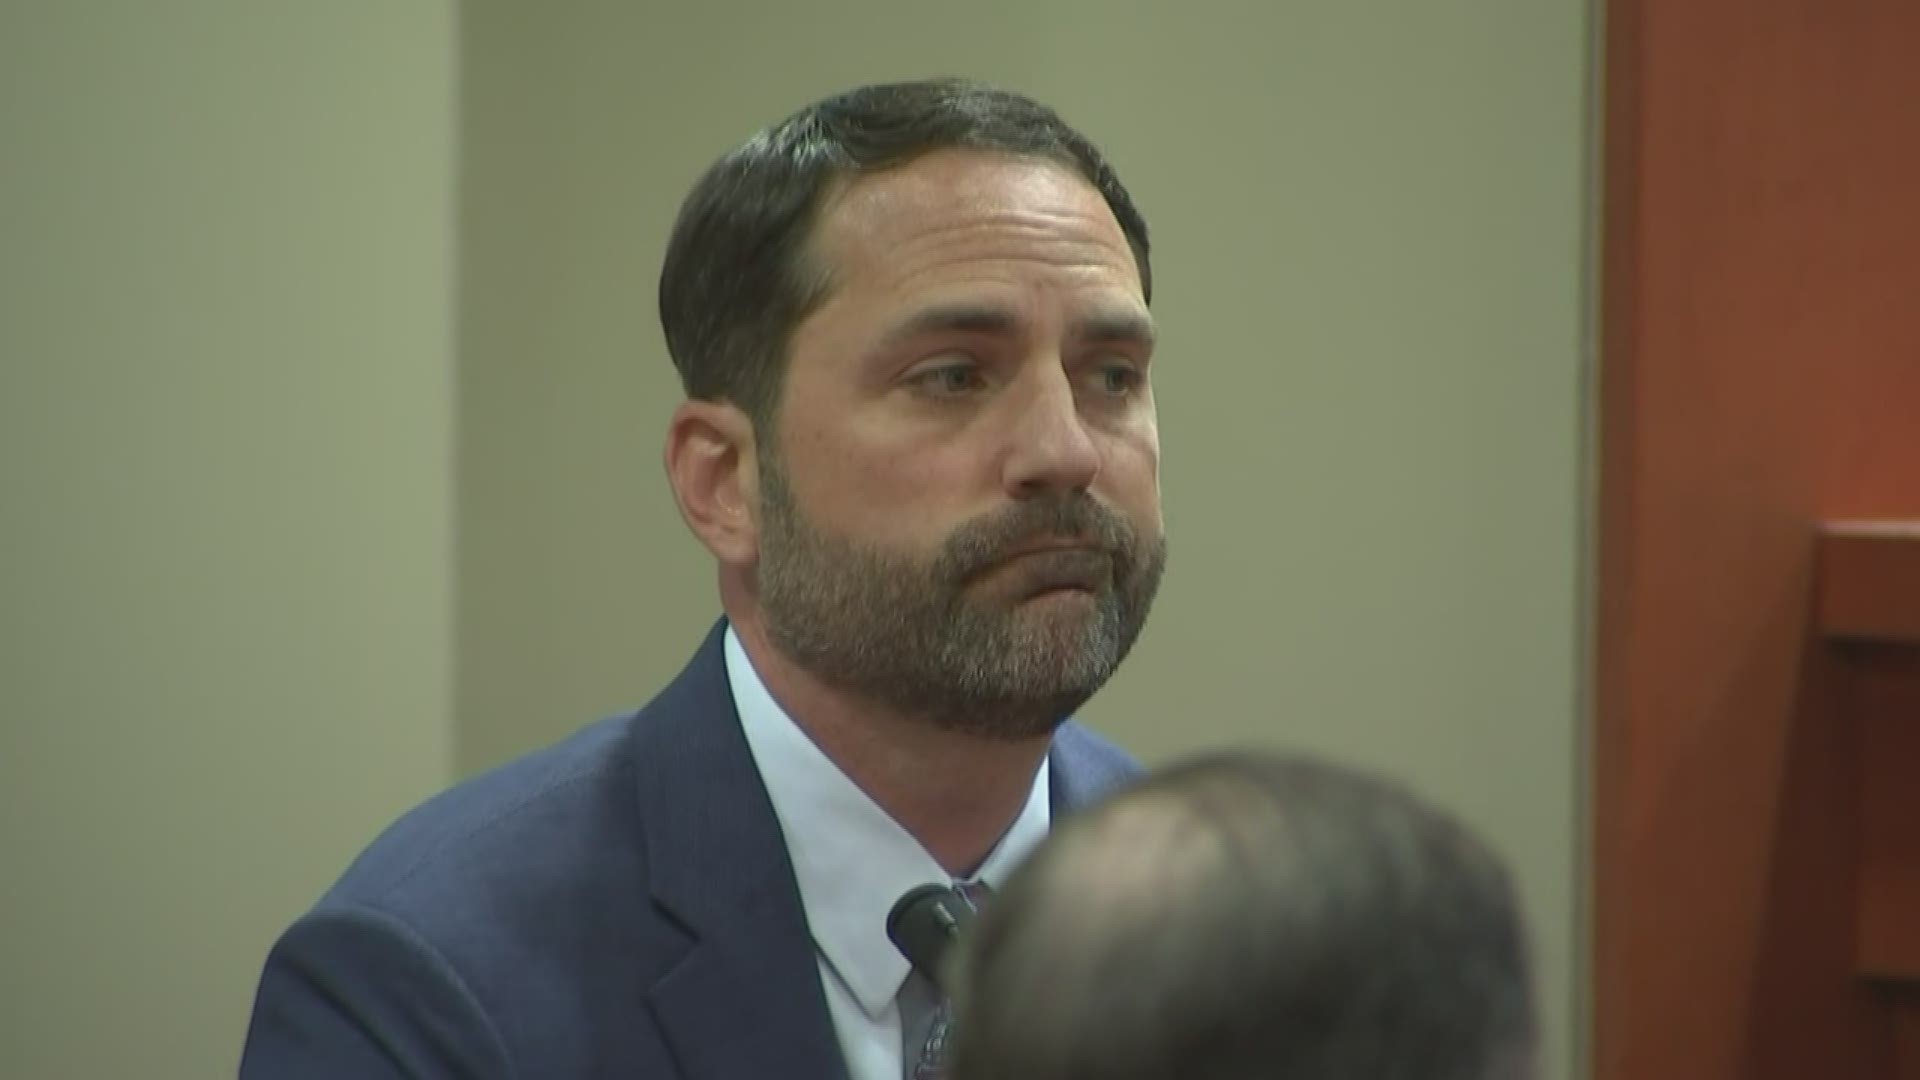 Nicholas Robichaux gave the statement prior to Friday's sentencing of Robert Olsen, the officer who shot and killed Anthony Hill, an unarmed veteran.